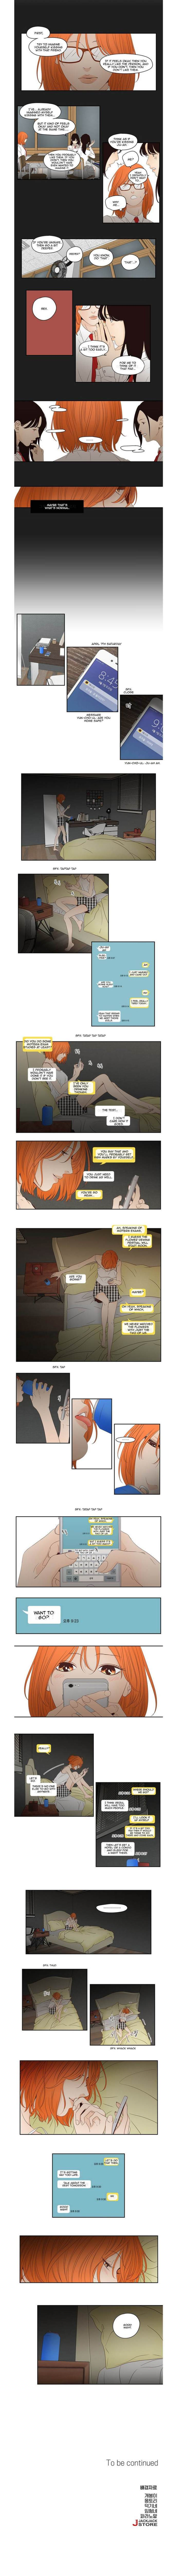 Pet’s Aesthetics - Chapter 1 Page 2